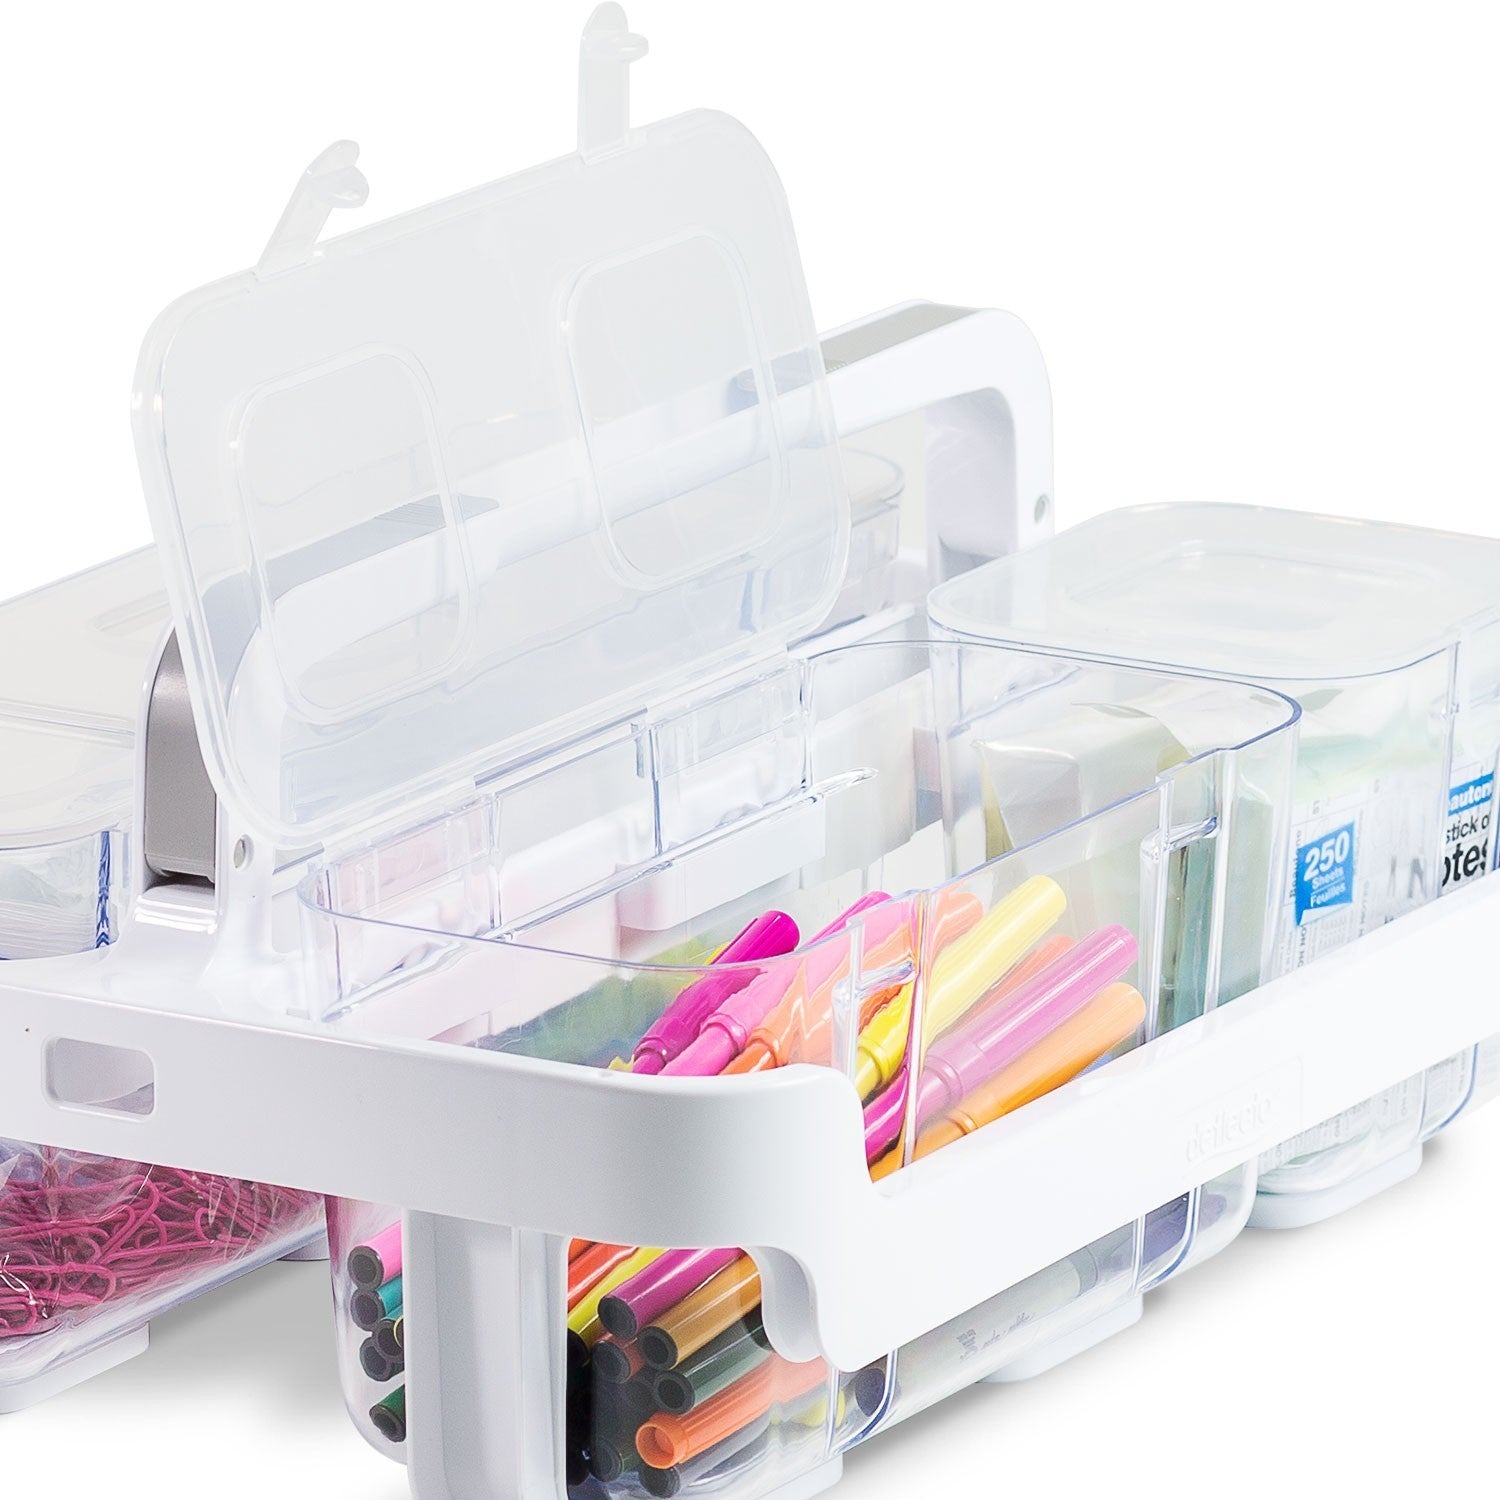 Stackable Caddy Organizer with S, M and L Containers, Plastic, 10.5 x 14 x  6.5, White Caddy/Clear Containers - Supply Solutions